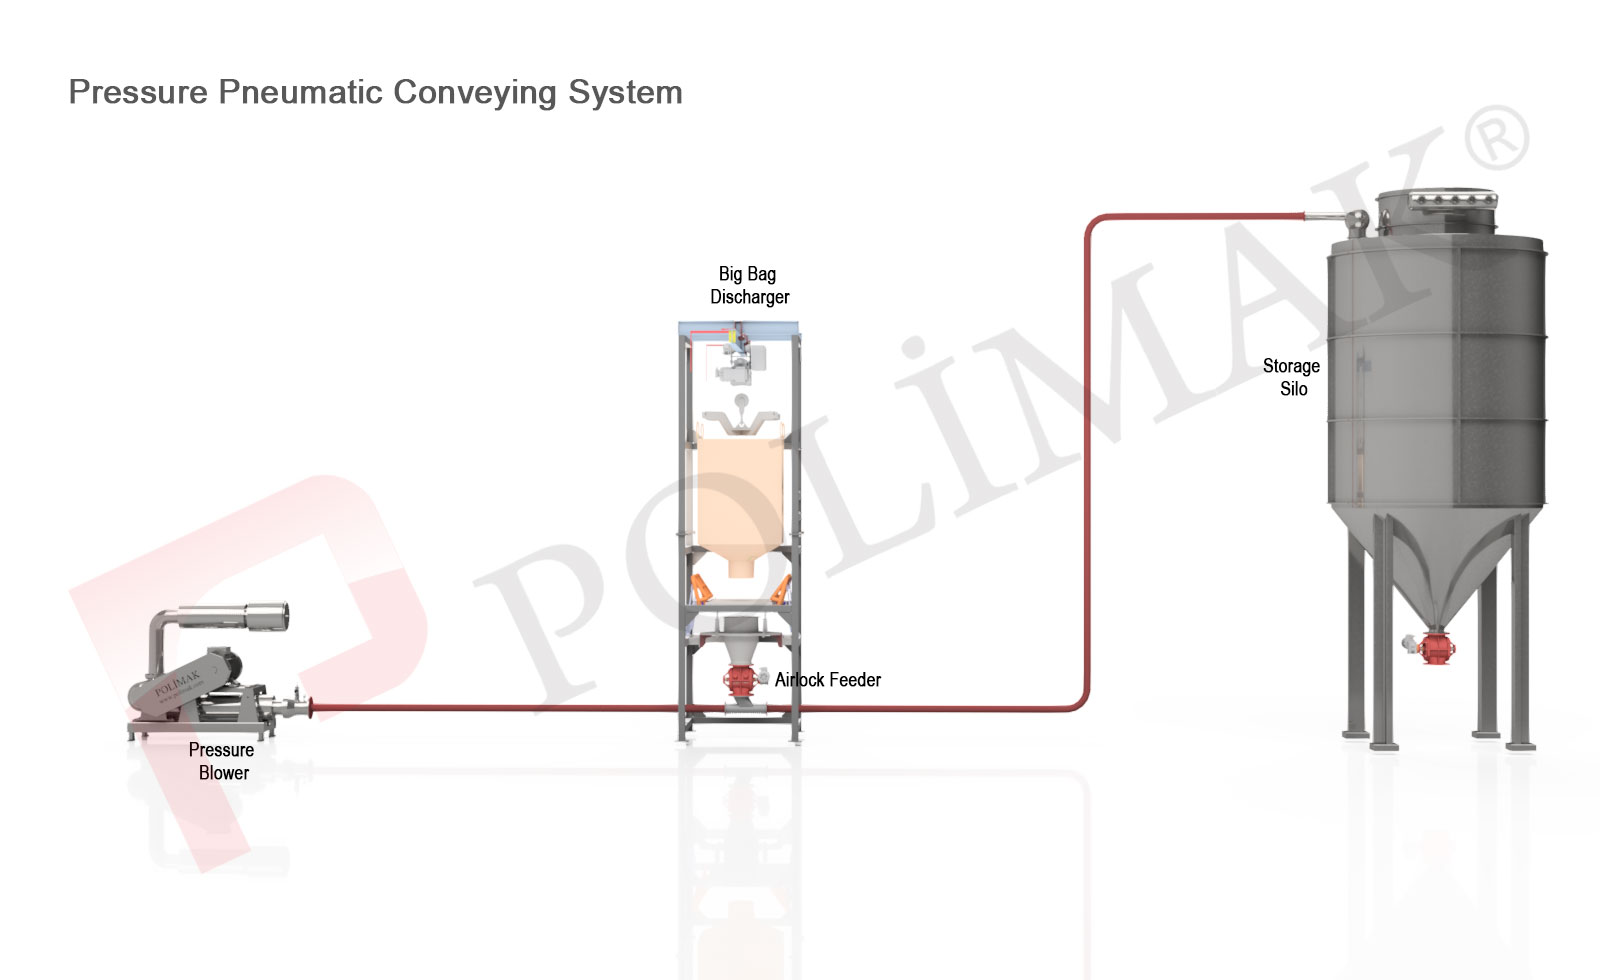 Pressure pneumatic conveying system.